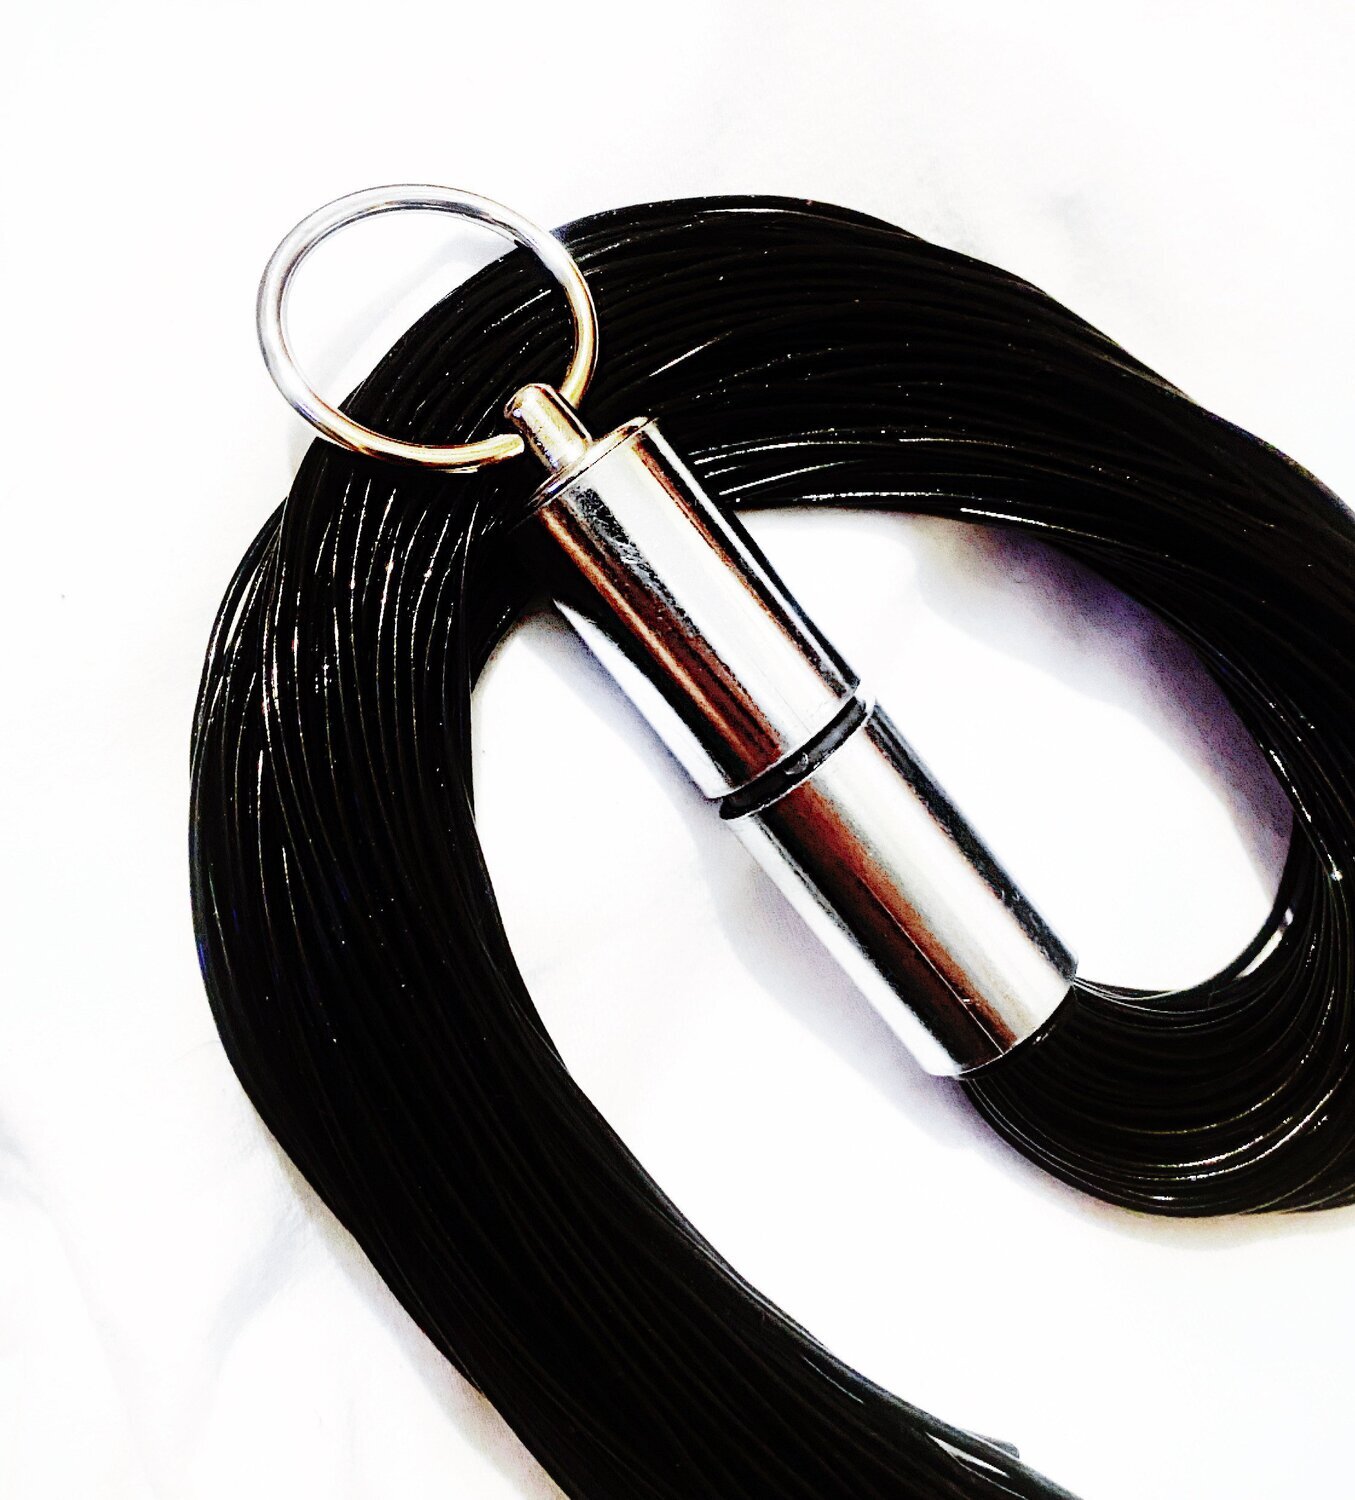 Chrome Ring Collection Flogger Ltd Edition BDSMmpact Play  Gear Spanking Flogger